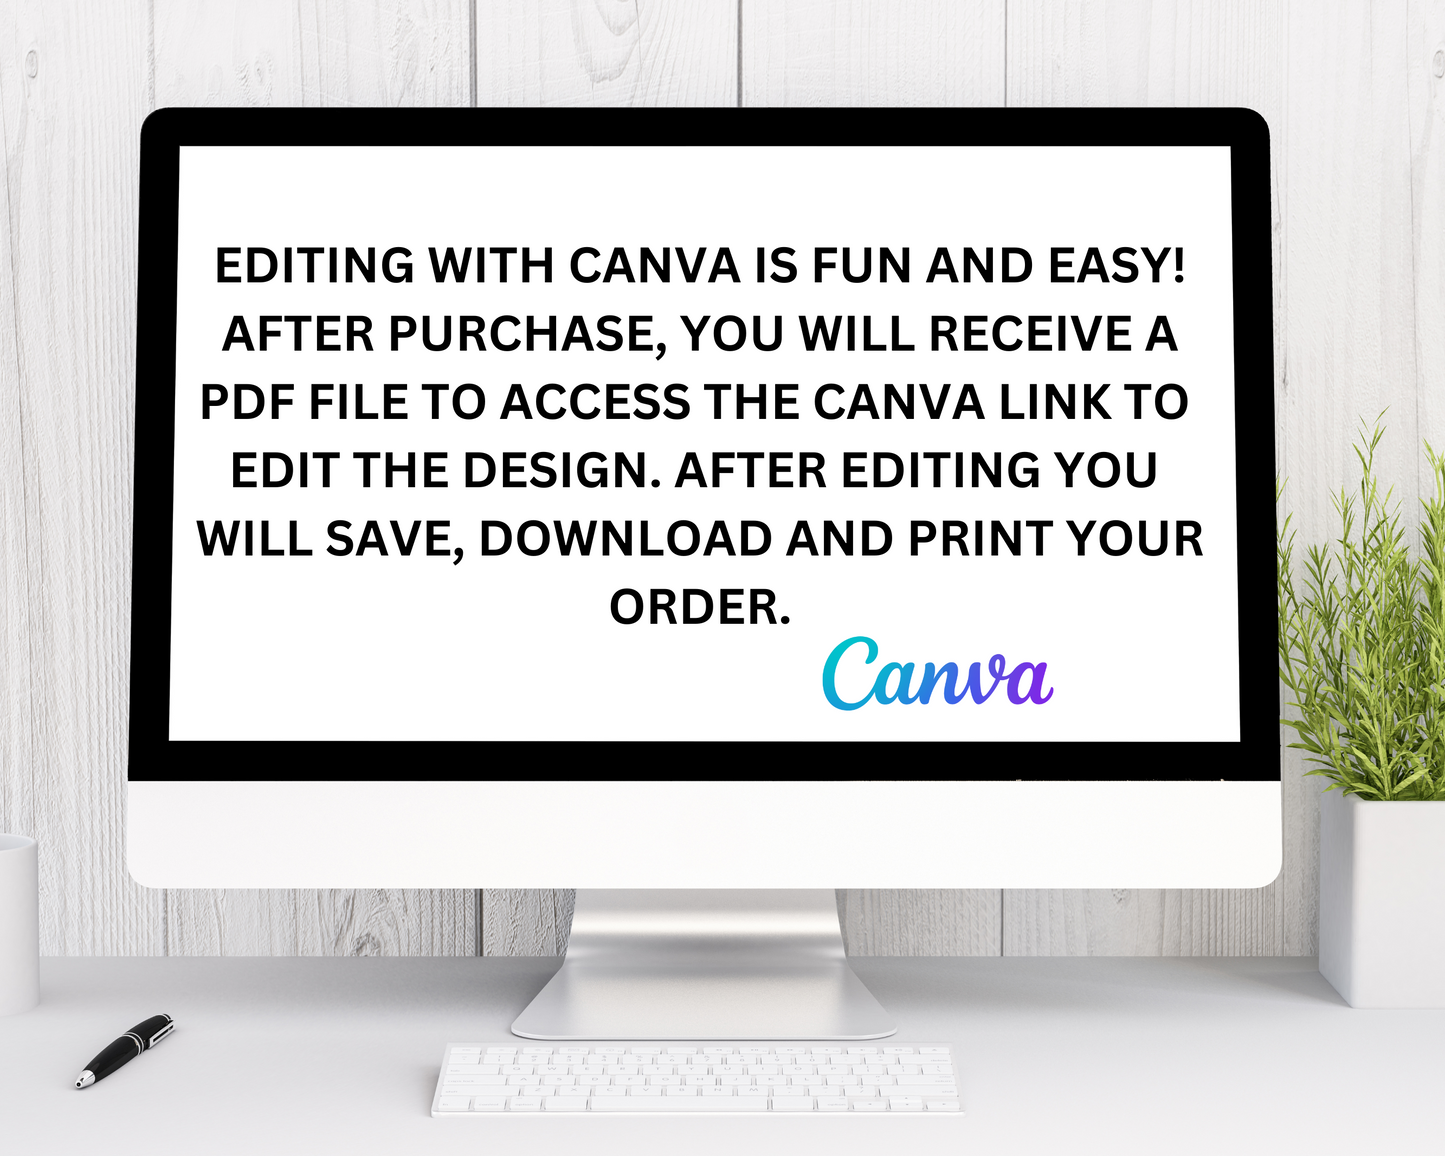 Pebbles Digital Party Package | Edit Text with Canva | You Edit | You Save | You Download | You Print | Digital File Only